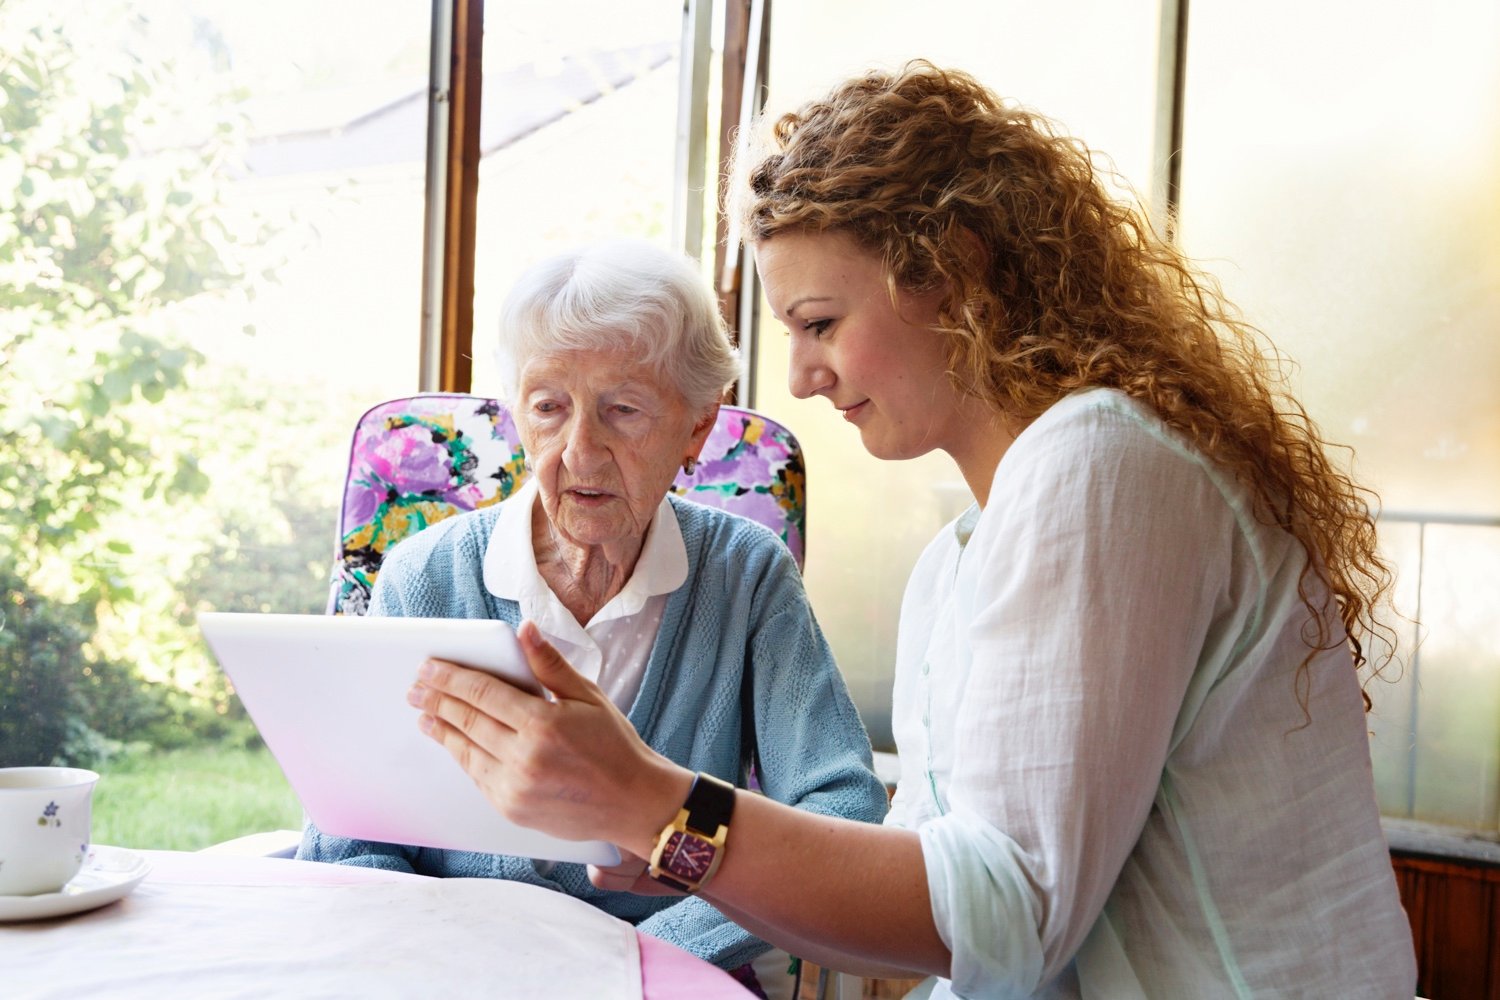 A team member using a digital pad with a senior resident